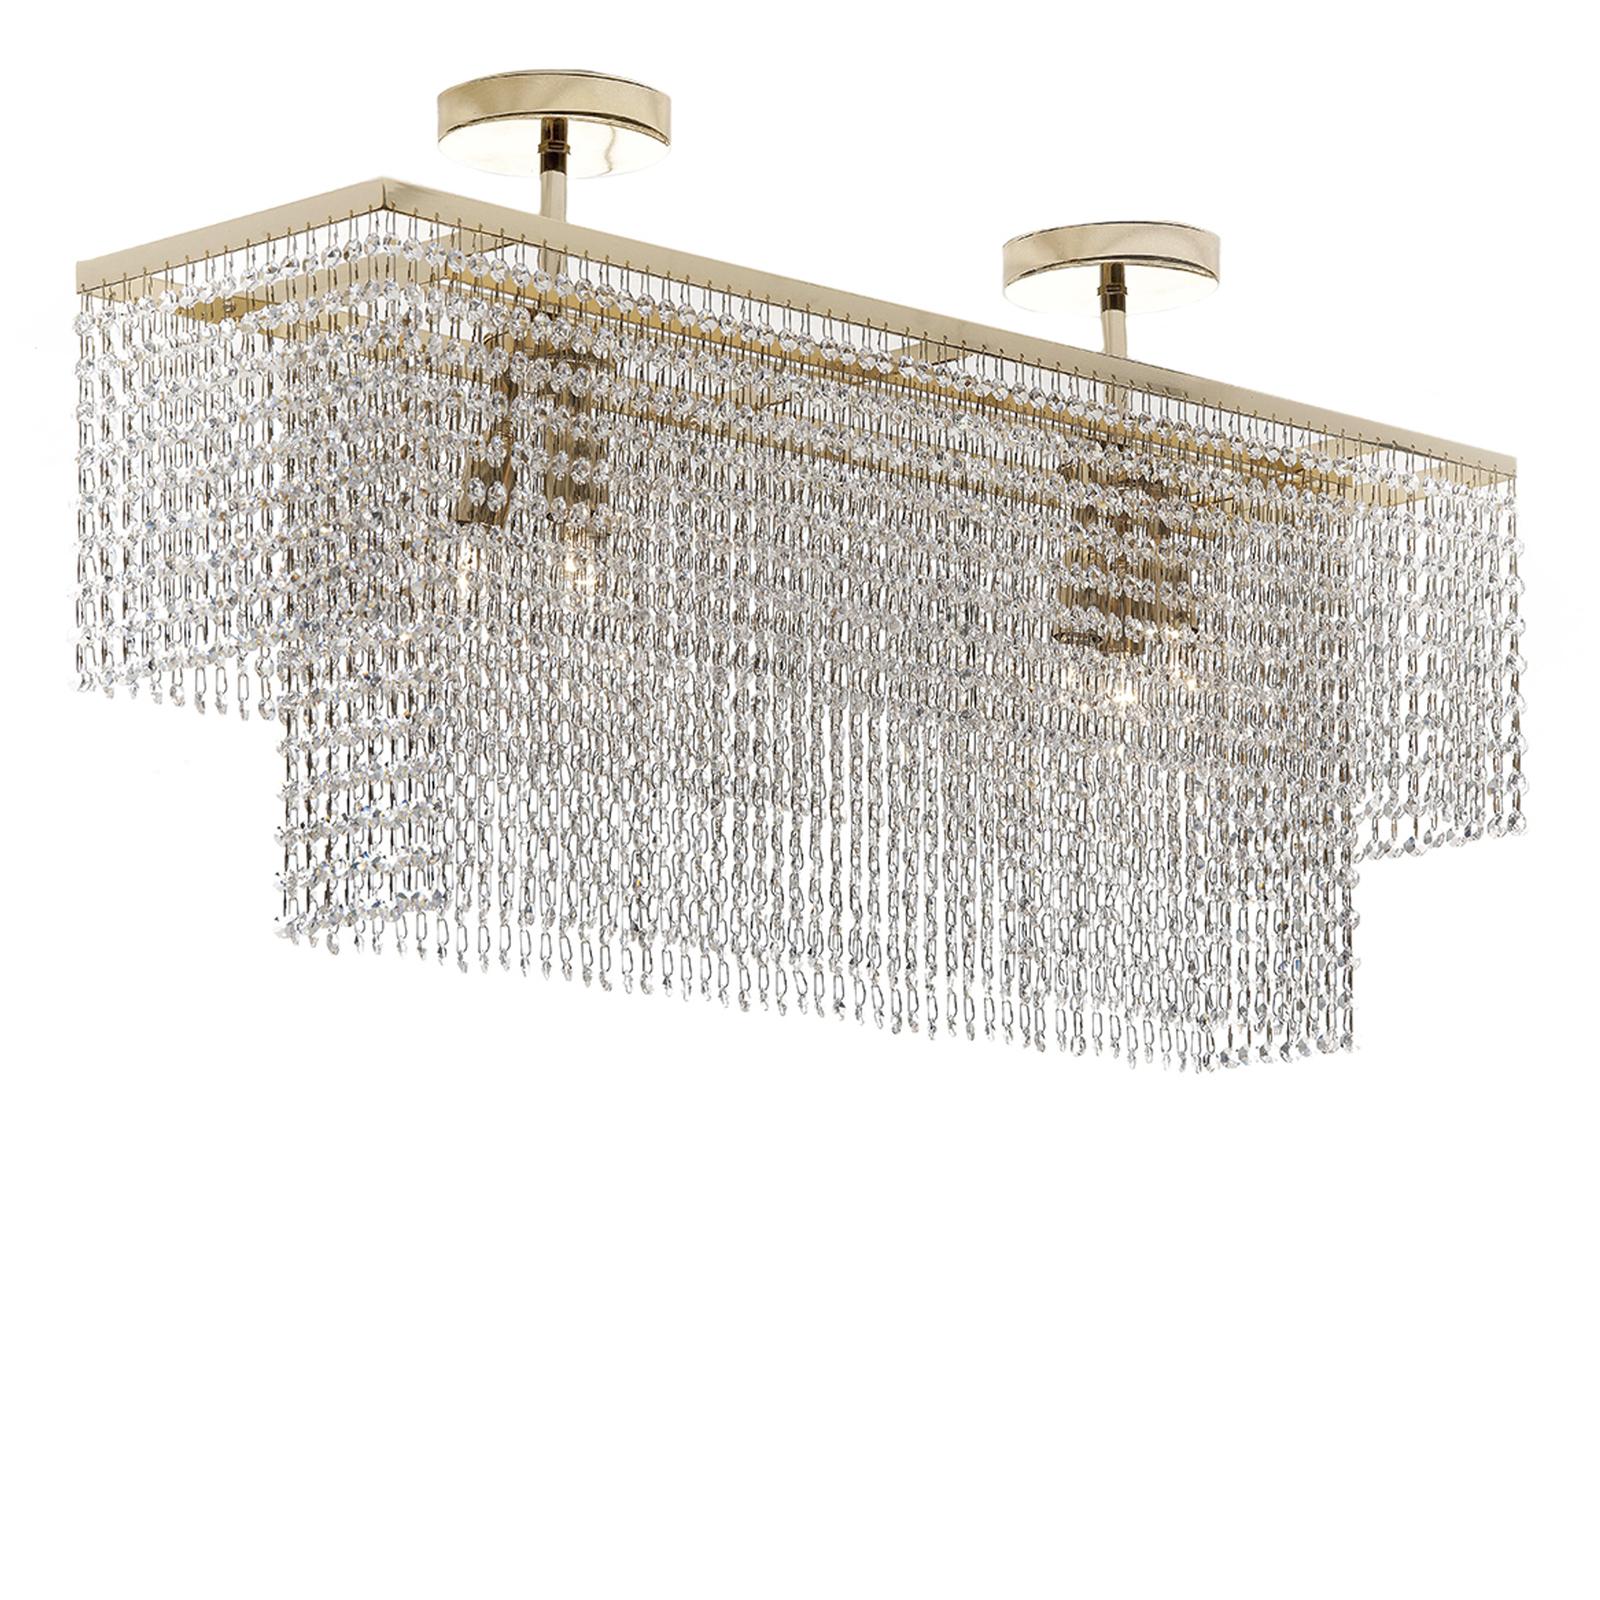 This exquisite chandelier is inspired by the bold sophistication of the Art Deco style. The supporting structure is made entirely of metal with a gold finish. The inner part consists of two round bases, each of which supports a vertical element with